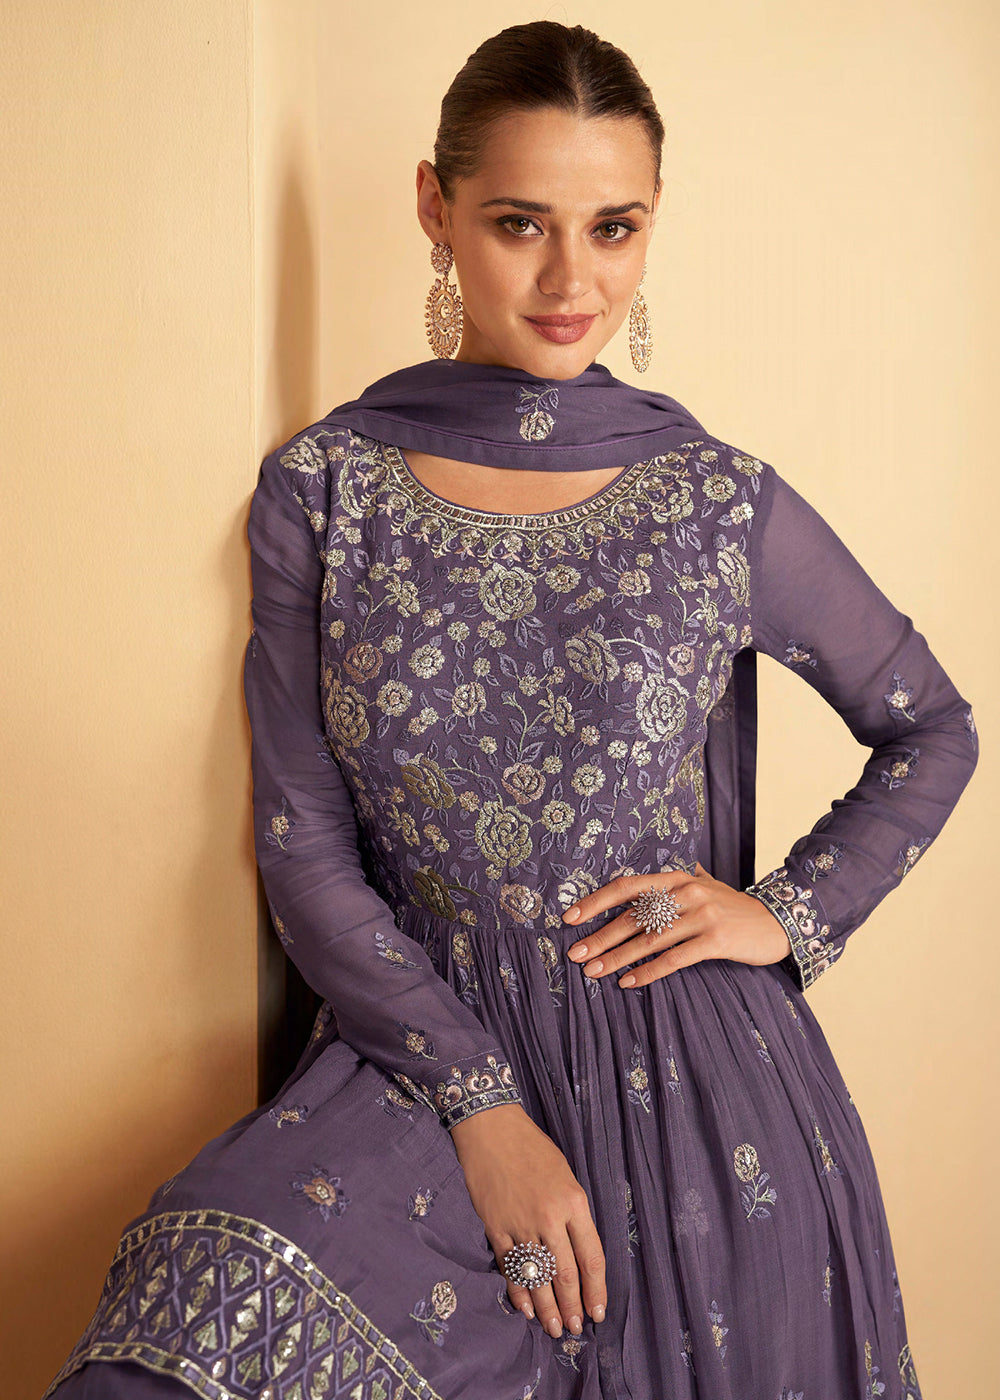 Shop Now Pretty Purple Sequins Embroidered Sharara Style Suit Online at Empress Clothing in USA, UK, Canada, Germany & Worldwide. 